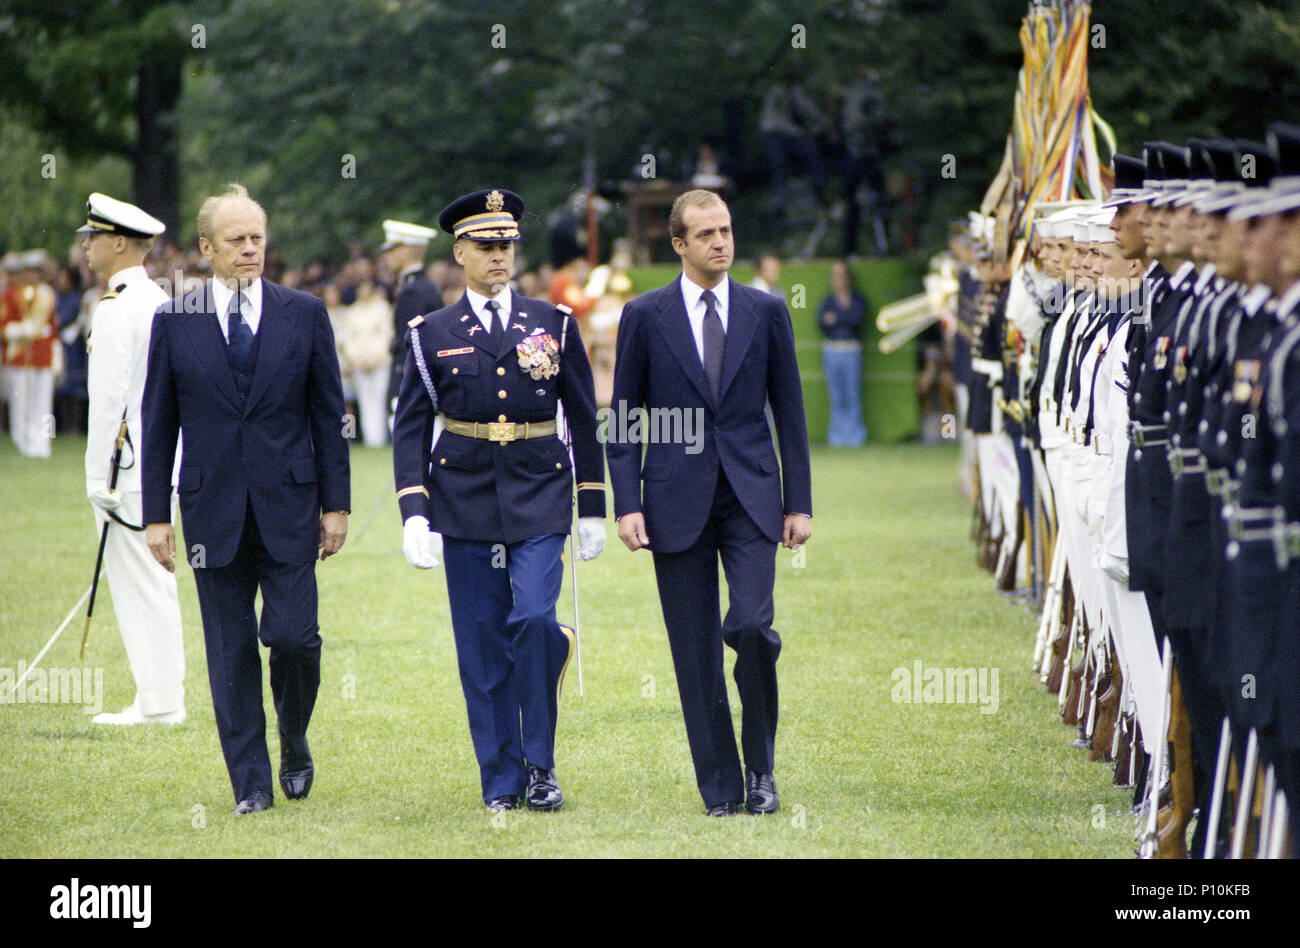 1976, June 2 – South Lawn – The White House –  Gerald R. Ford, King Juan Carlos I, Captain of the Guard, Honor Guard – GRF, Juan Carlos and Captain walking past Guard; moving toward camera – State Arrival Ceremony for King Juan Carlos I and Queen Sofia of Spain Stock Photo